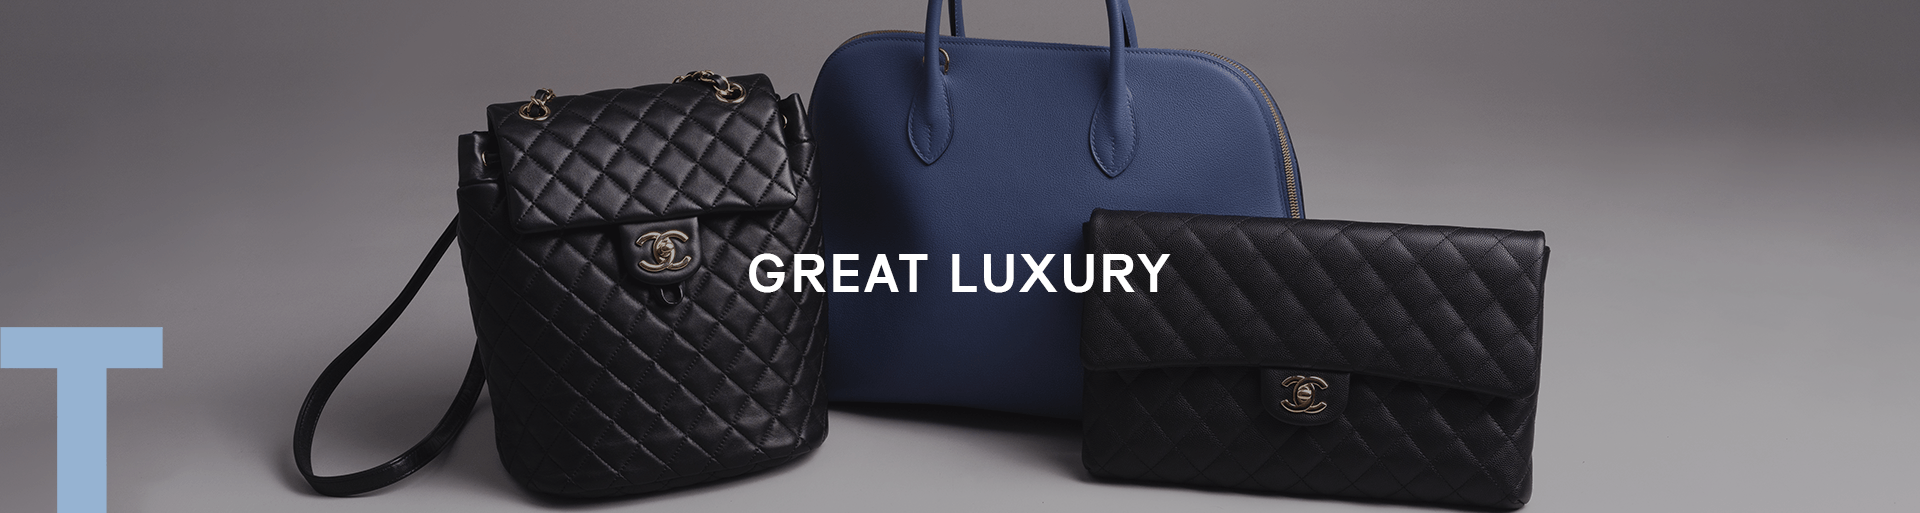 great luxury High-end Luxury items